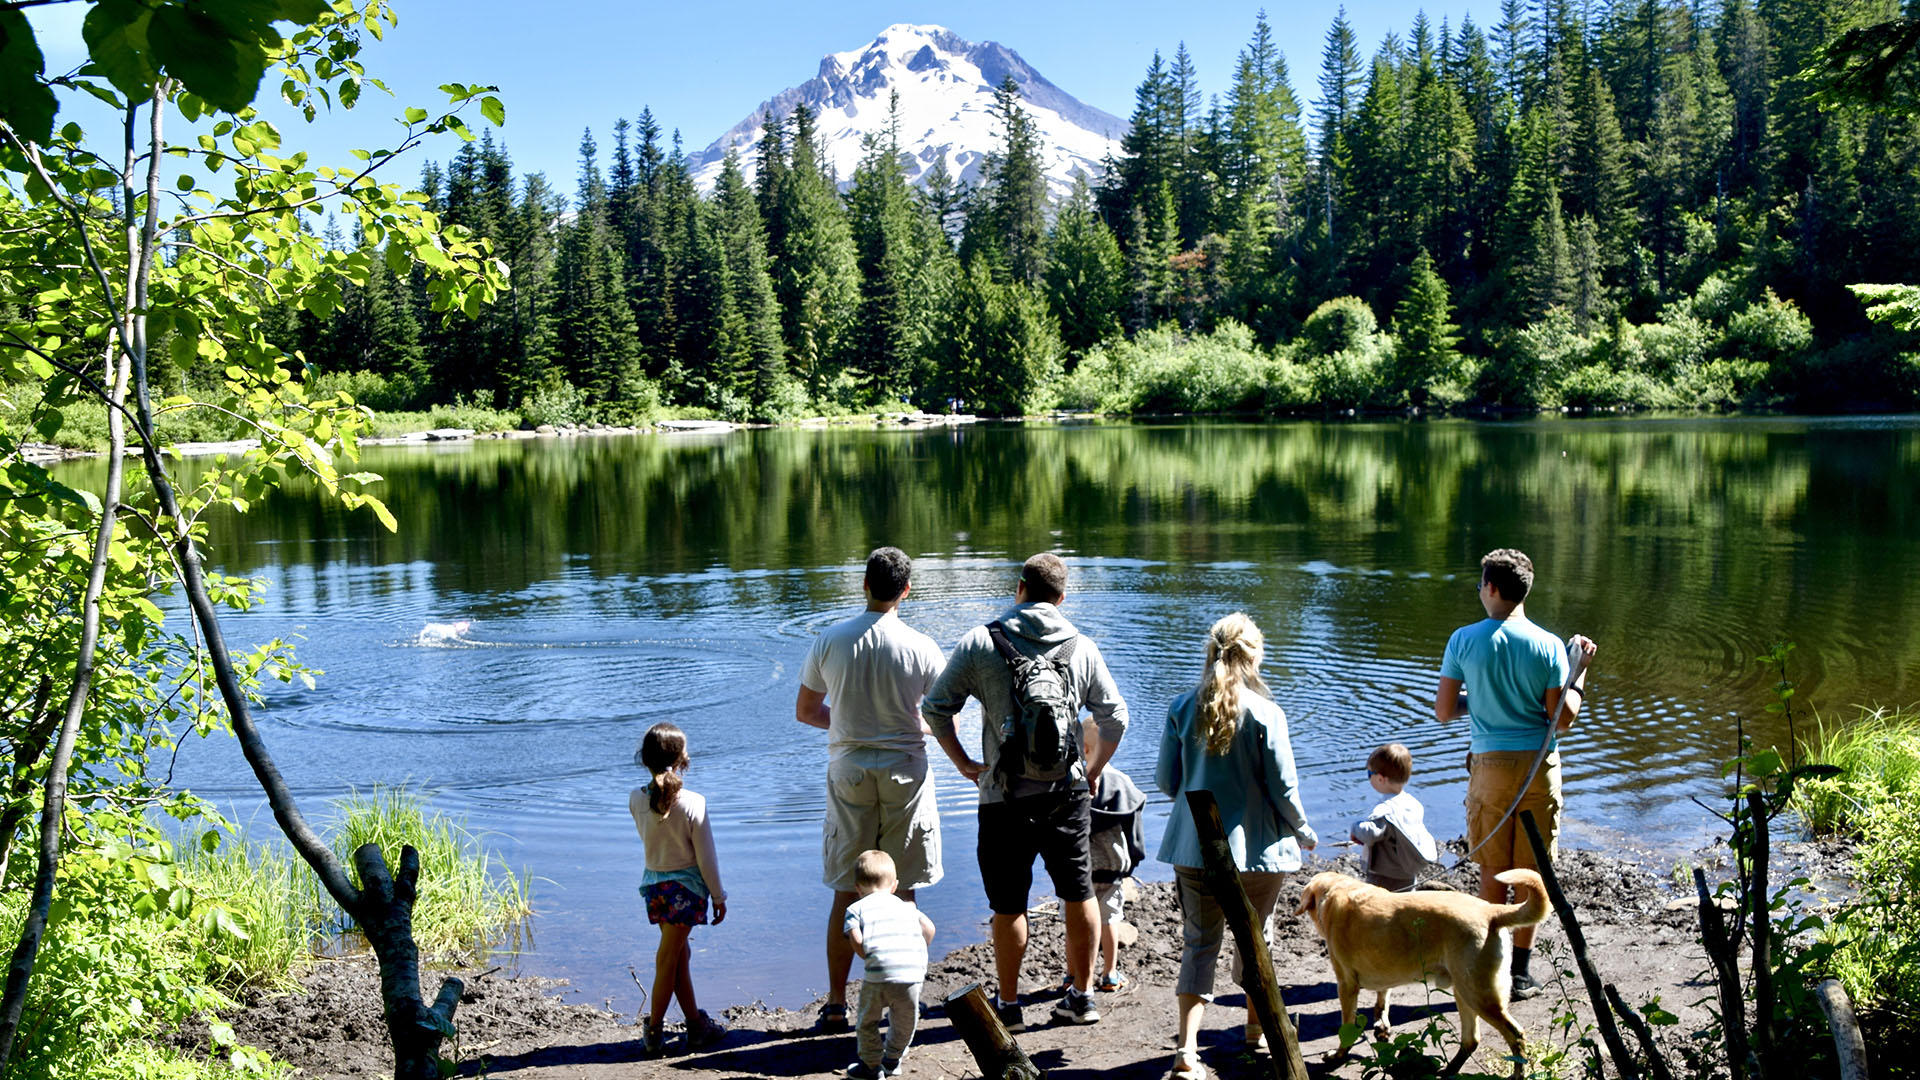 A family skips rocks in Mirror Lake, disrupting the reflection of Mt. Hood.